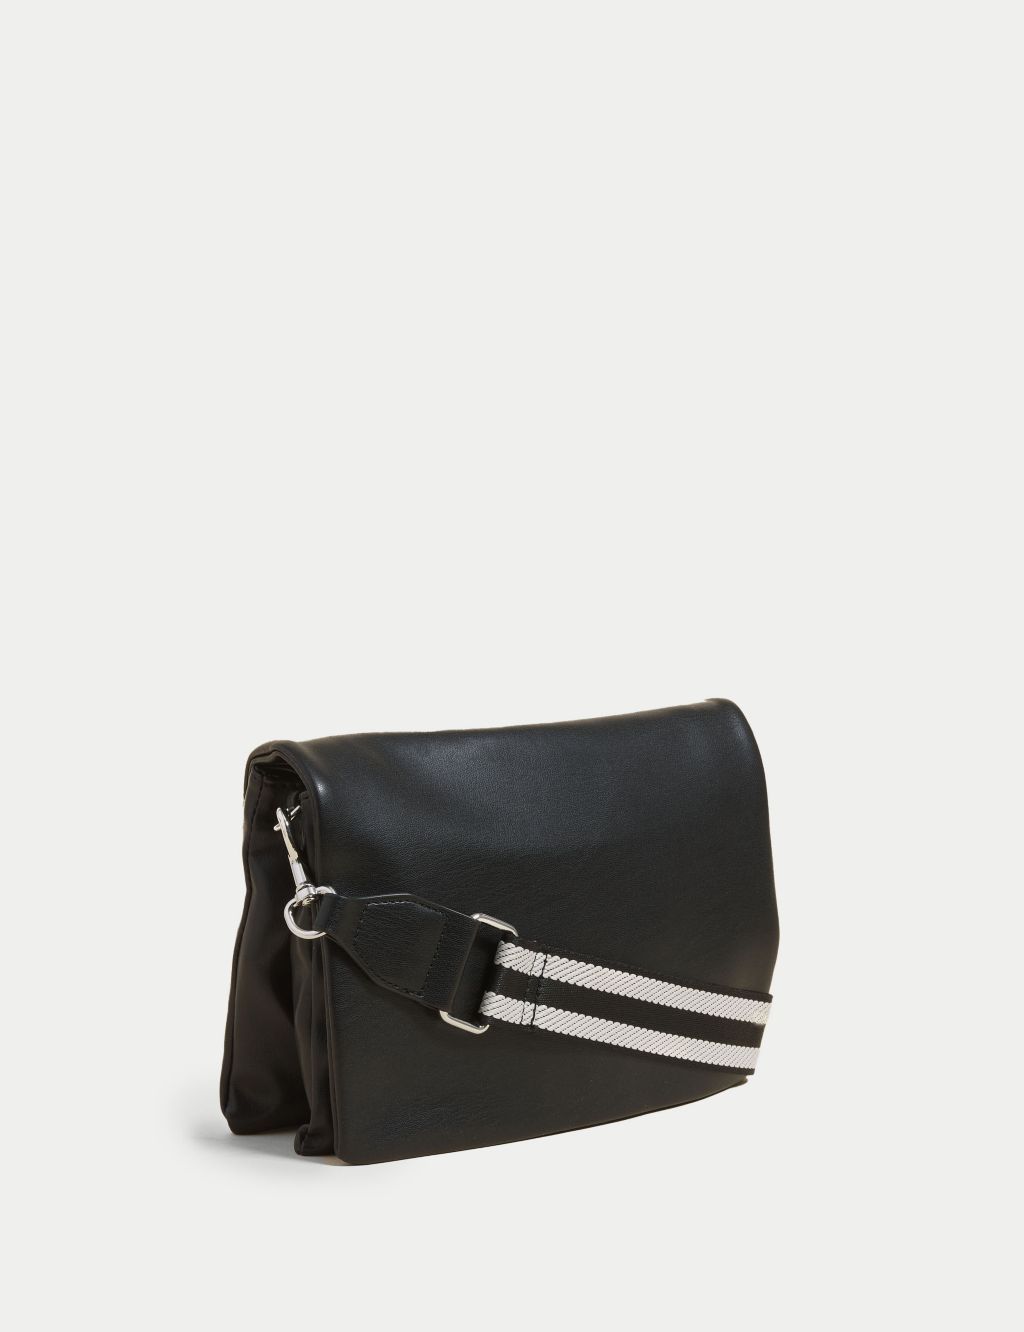 Faux Leather Messenger Cross Body Bag image 1